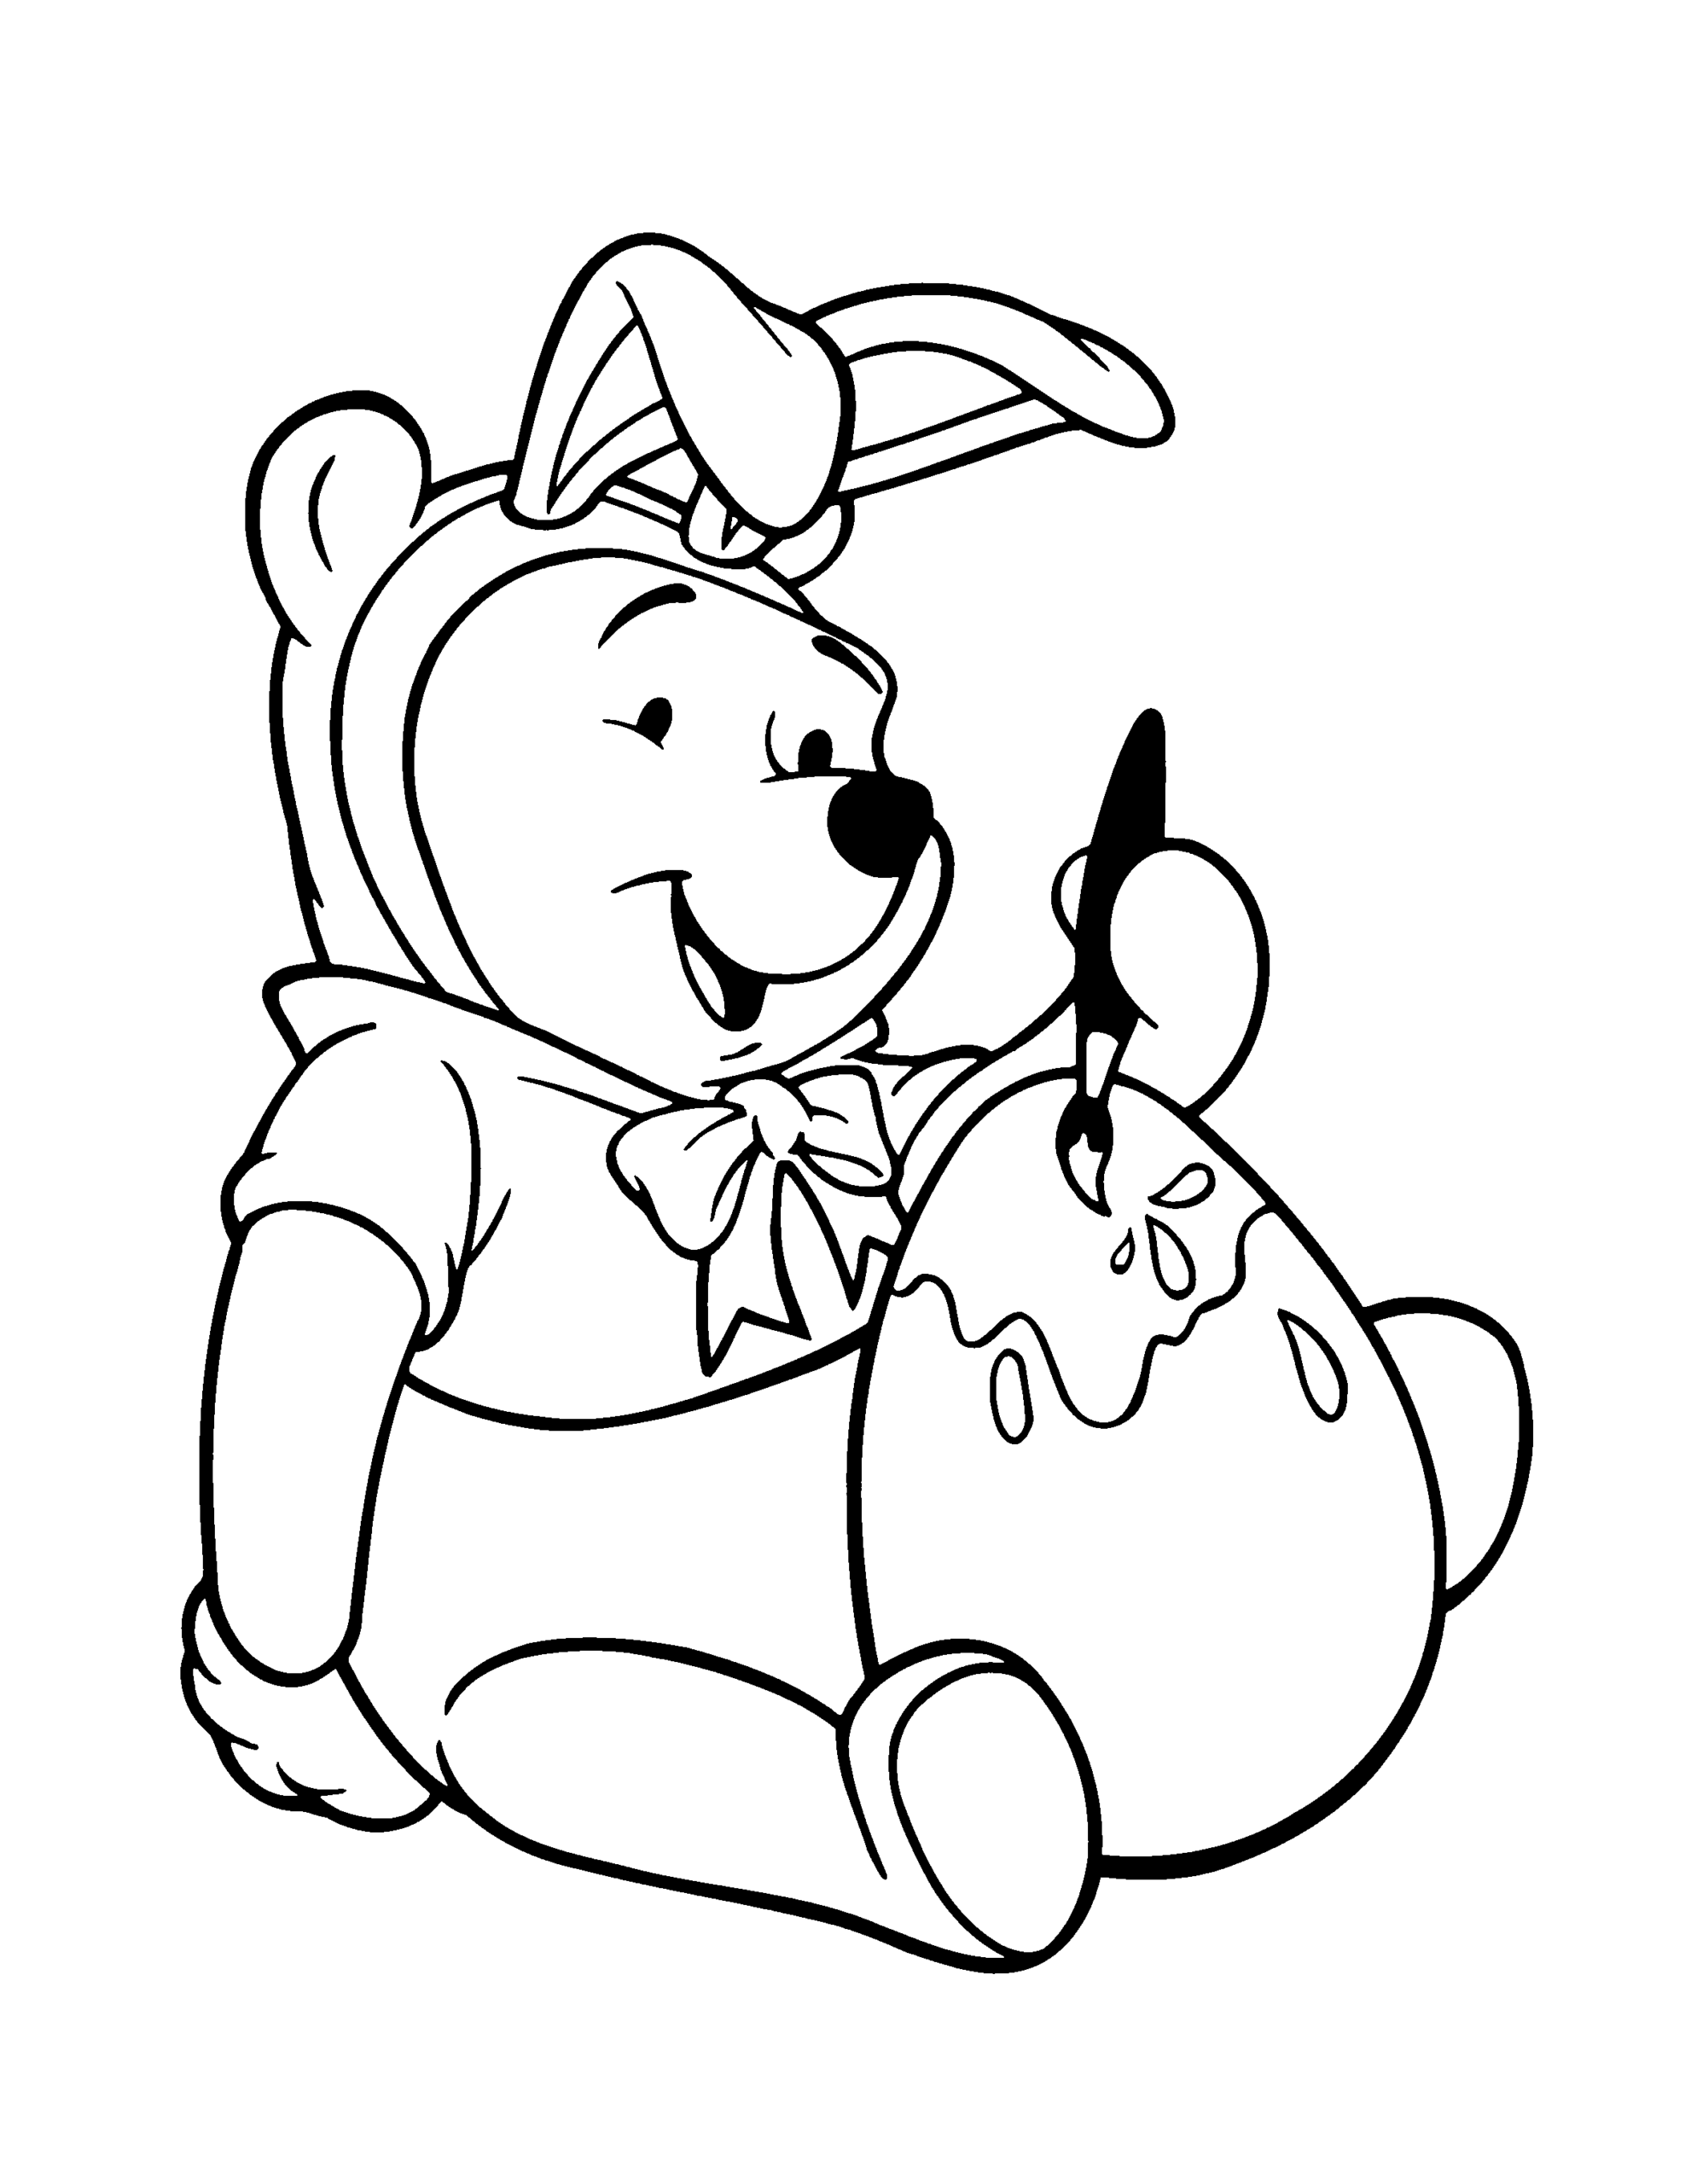 Winnie the Pooh Coloring Pages Cartoons winnie the pooh 63 Printable 2020 7180 Coloring4free